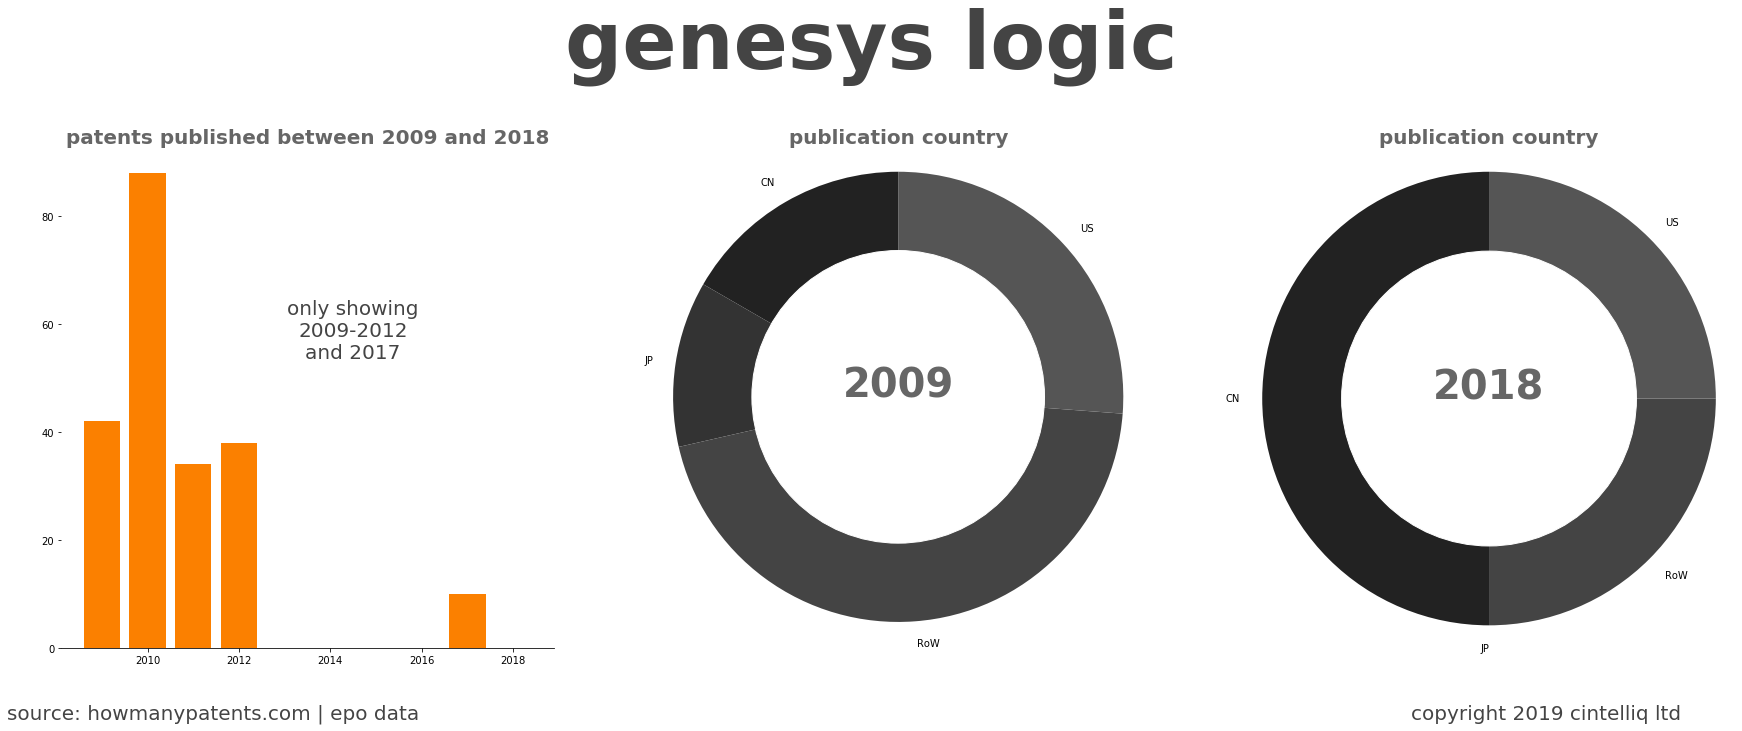 summary of patents for Genesys Logic